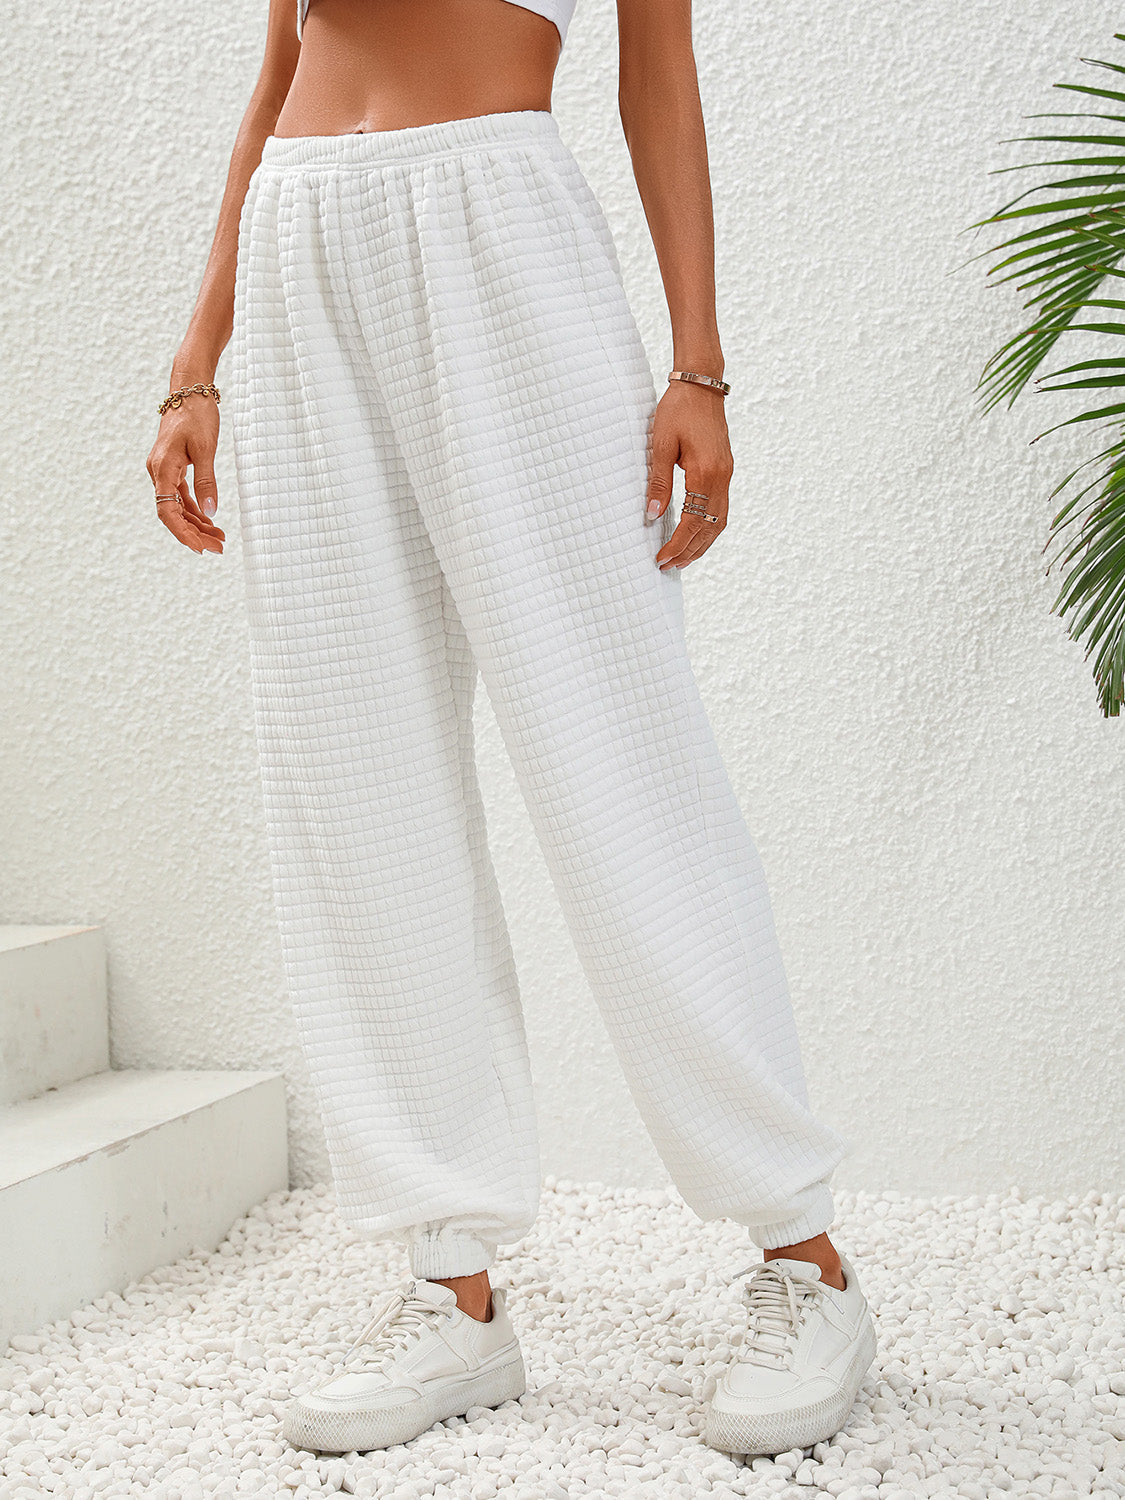 Textured Pull-On Joggers - White / S - Bottoms - Pants - 1 - 2024